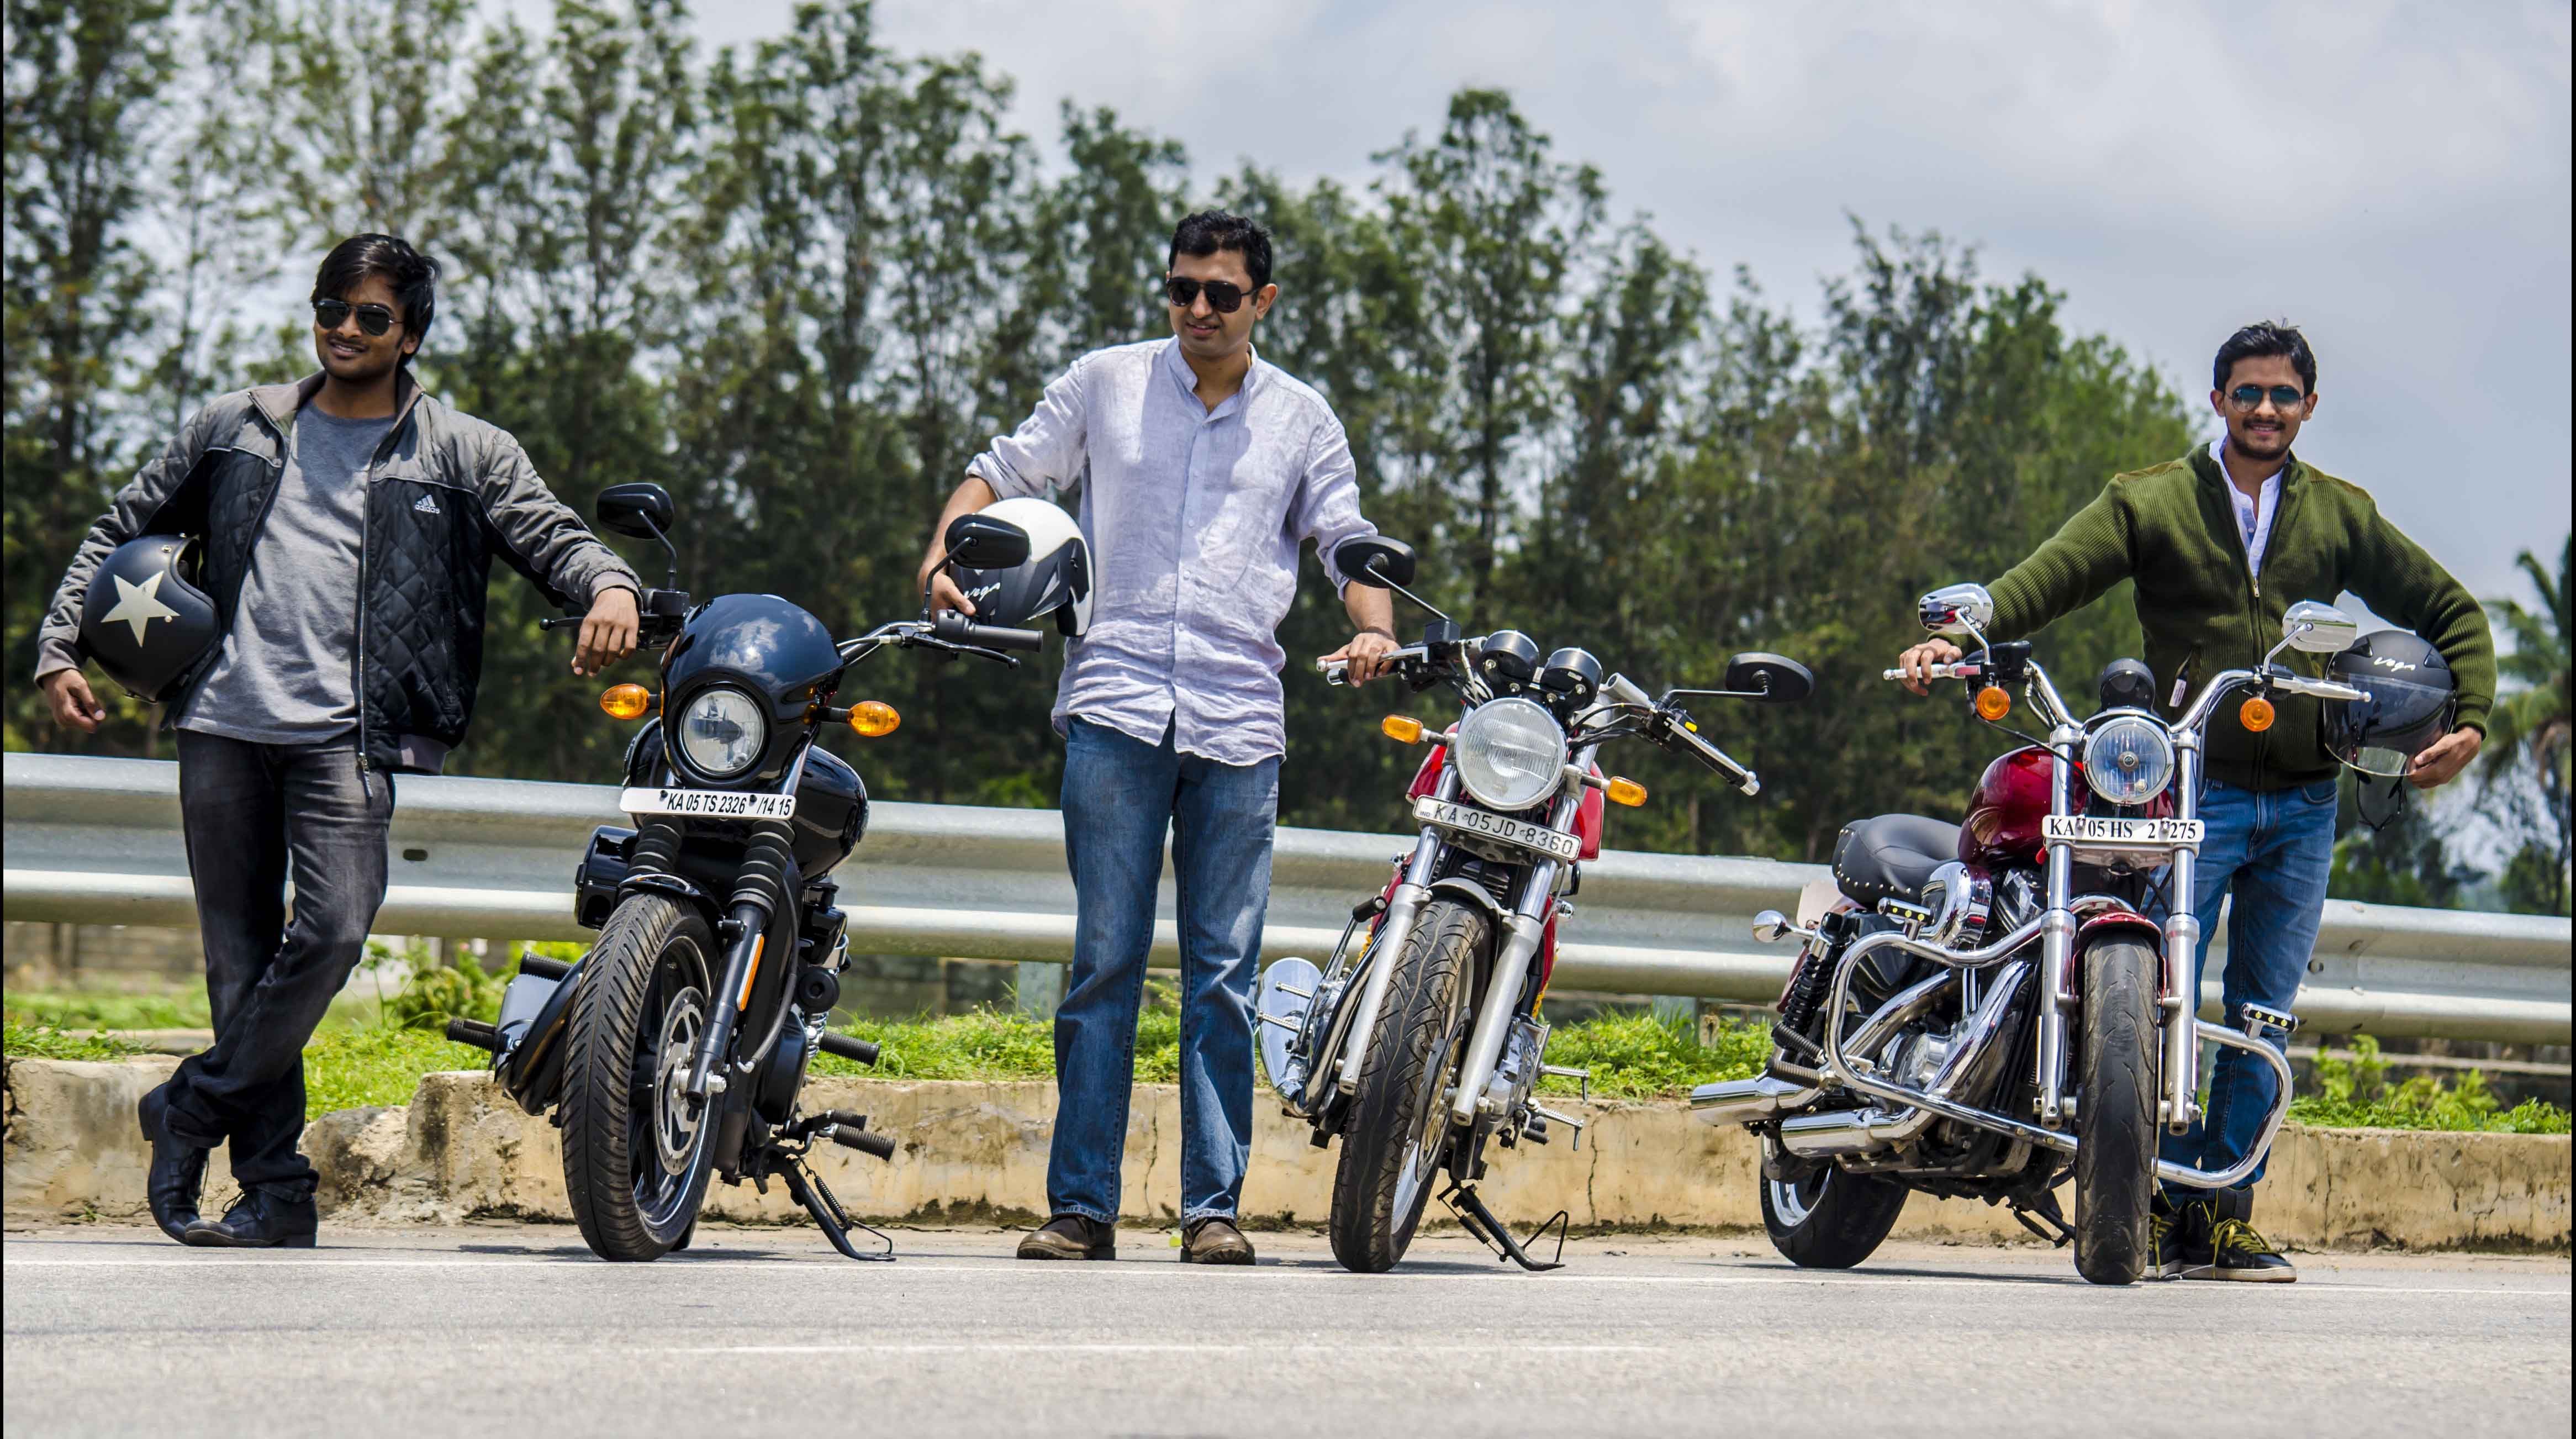 [The F Word] WickedRide raises $9.1 M funding led by Sequoia Capital and Accel Partners